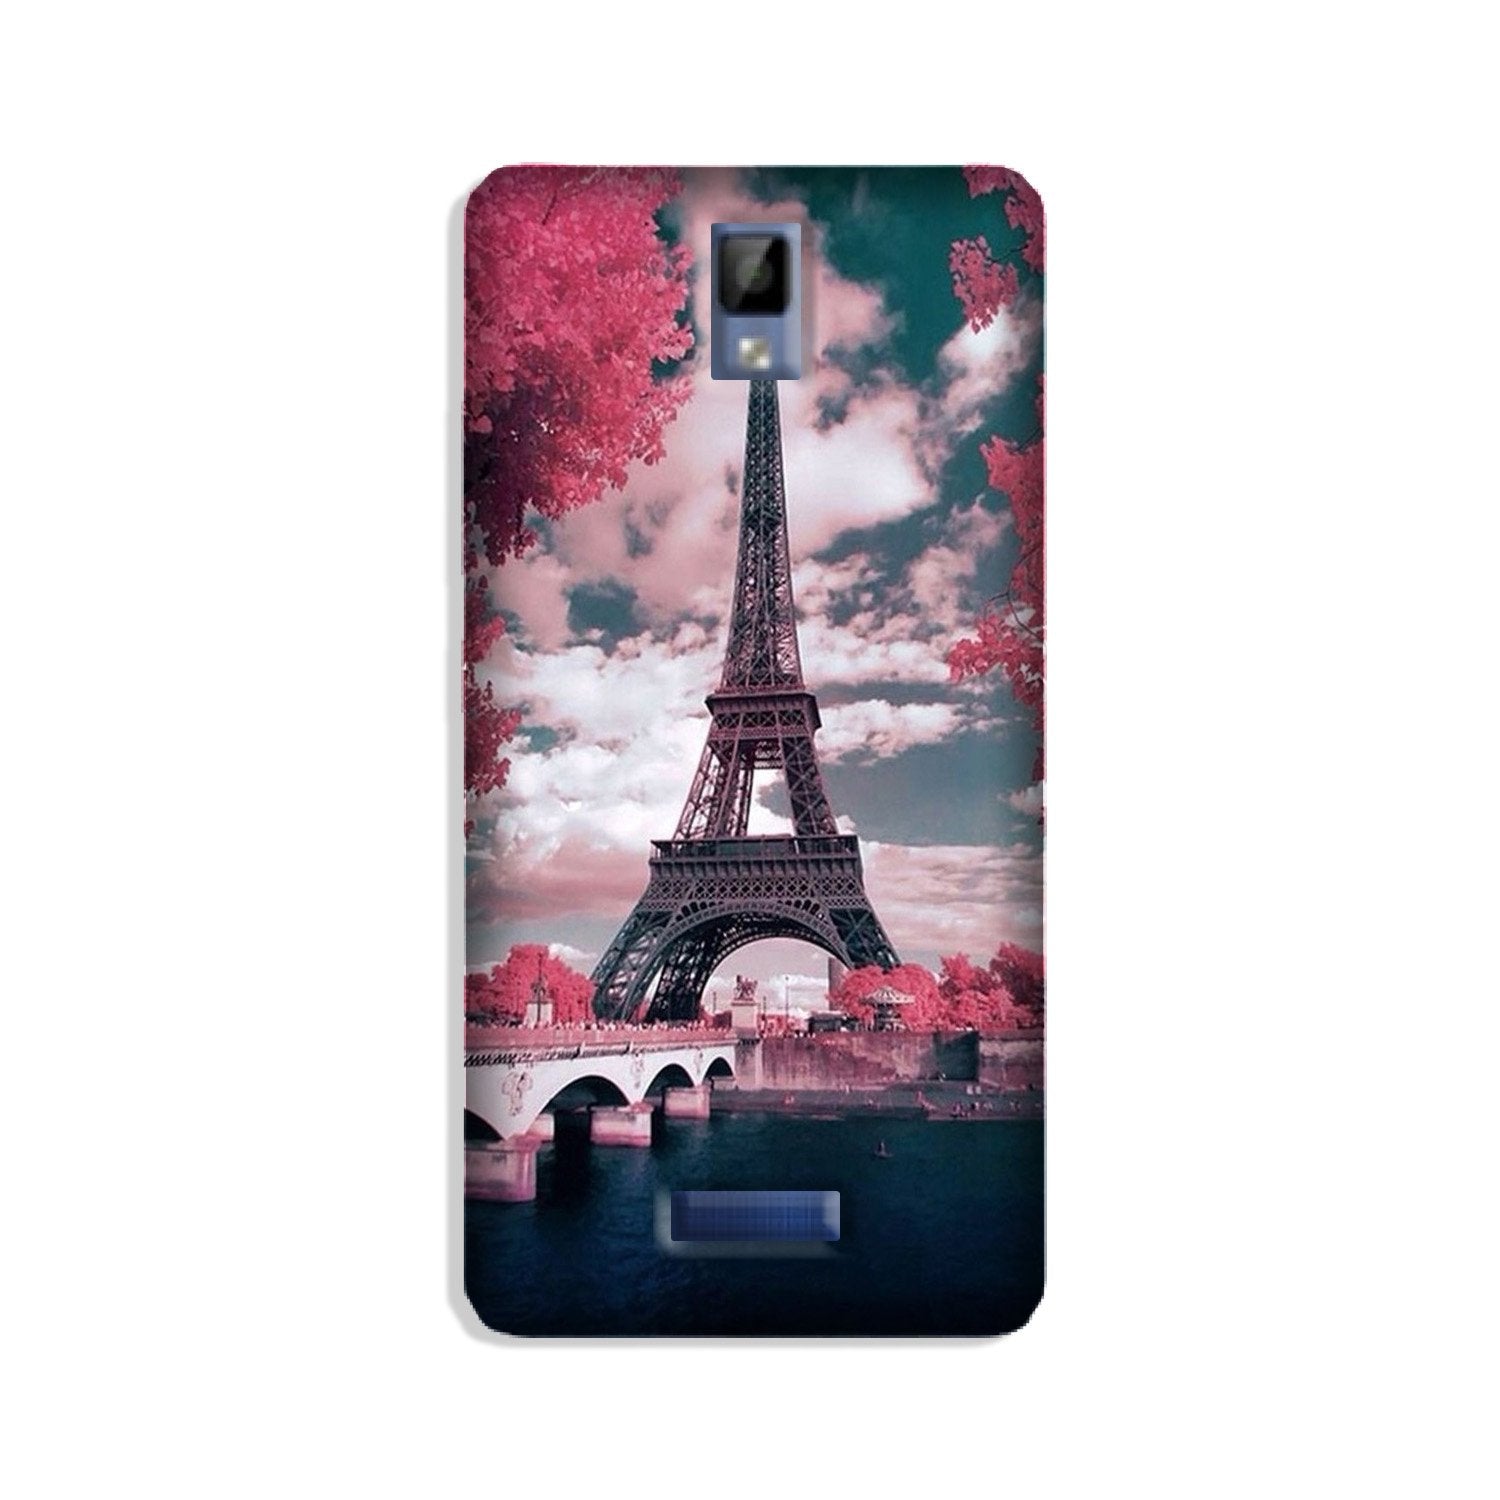 Eiffel Tower Case for Gionee P7  (Design - 101)